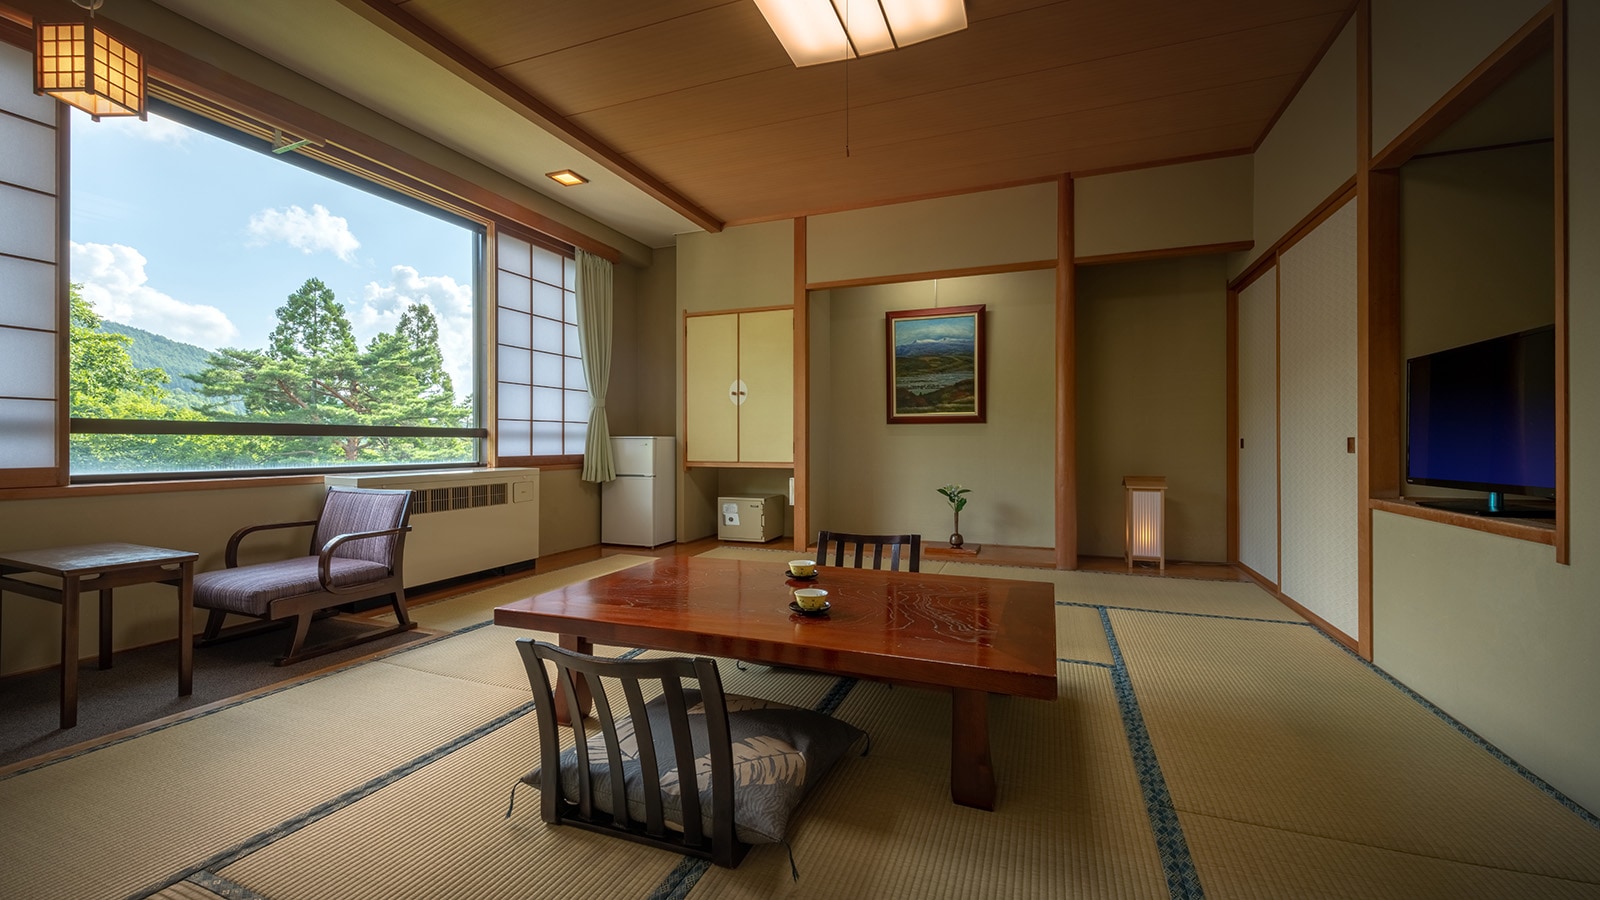 "Japanese-style room" A standard Japanese-style room where you can relax comfortably